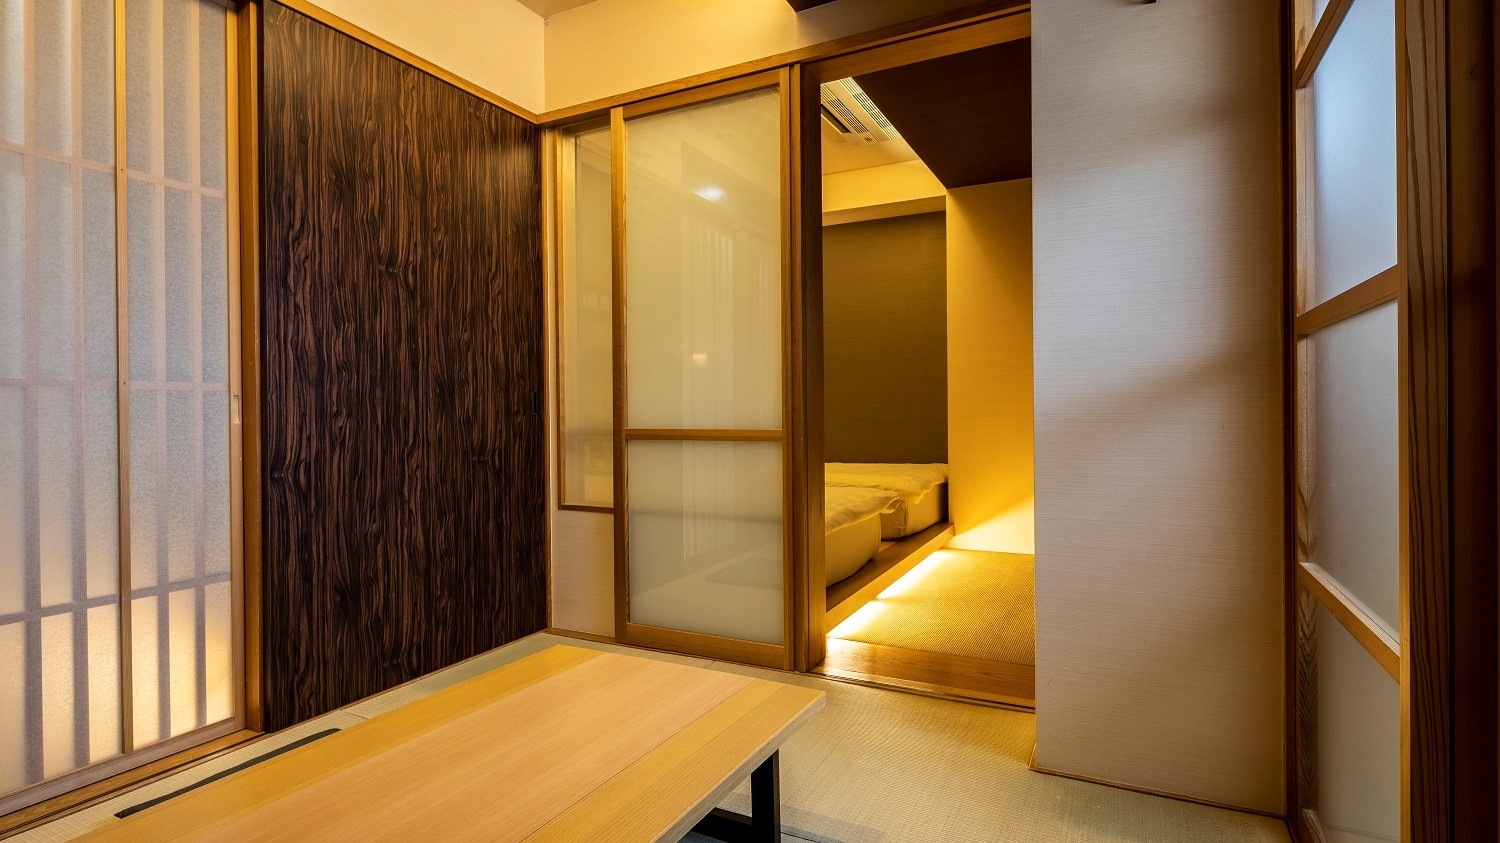 Deluxe twin Japanese-style room example